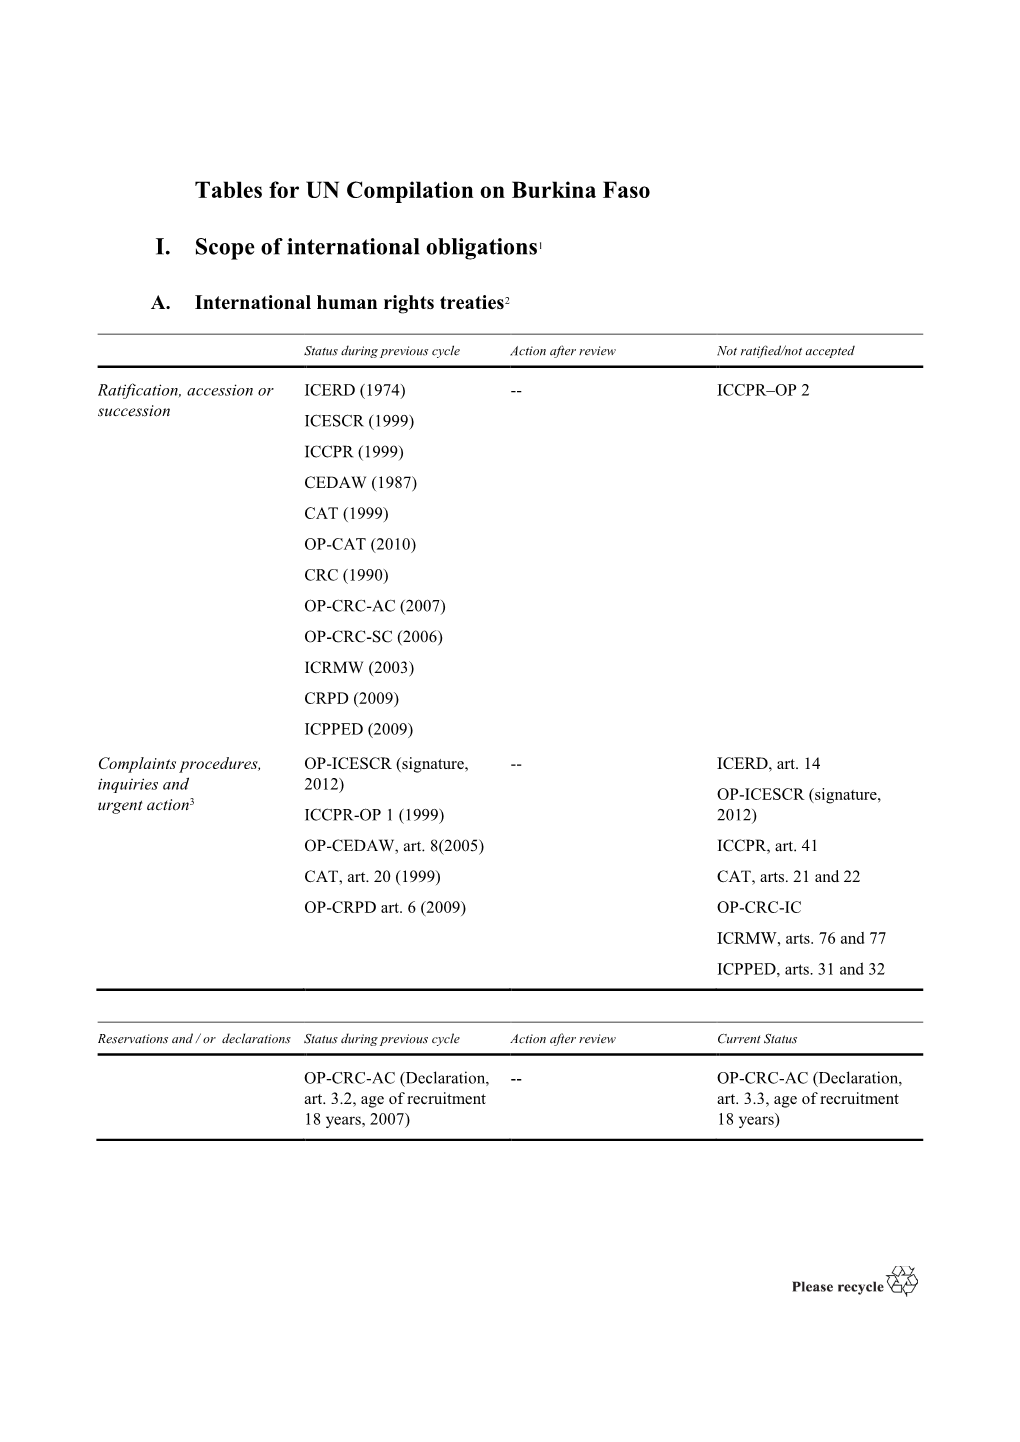 Tables for UN Compilation on Burkina Faso I. Scope of International